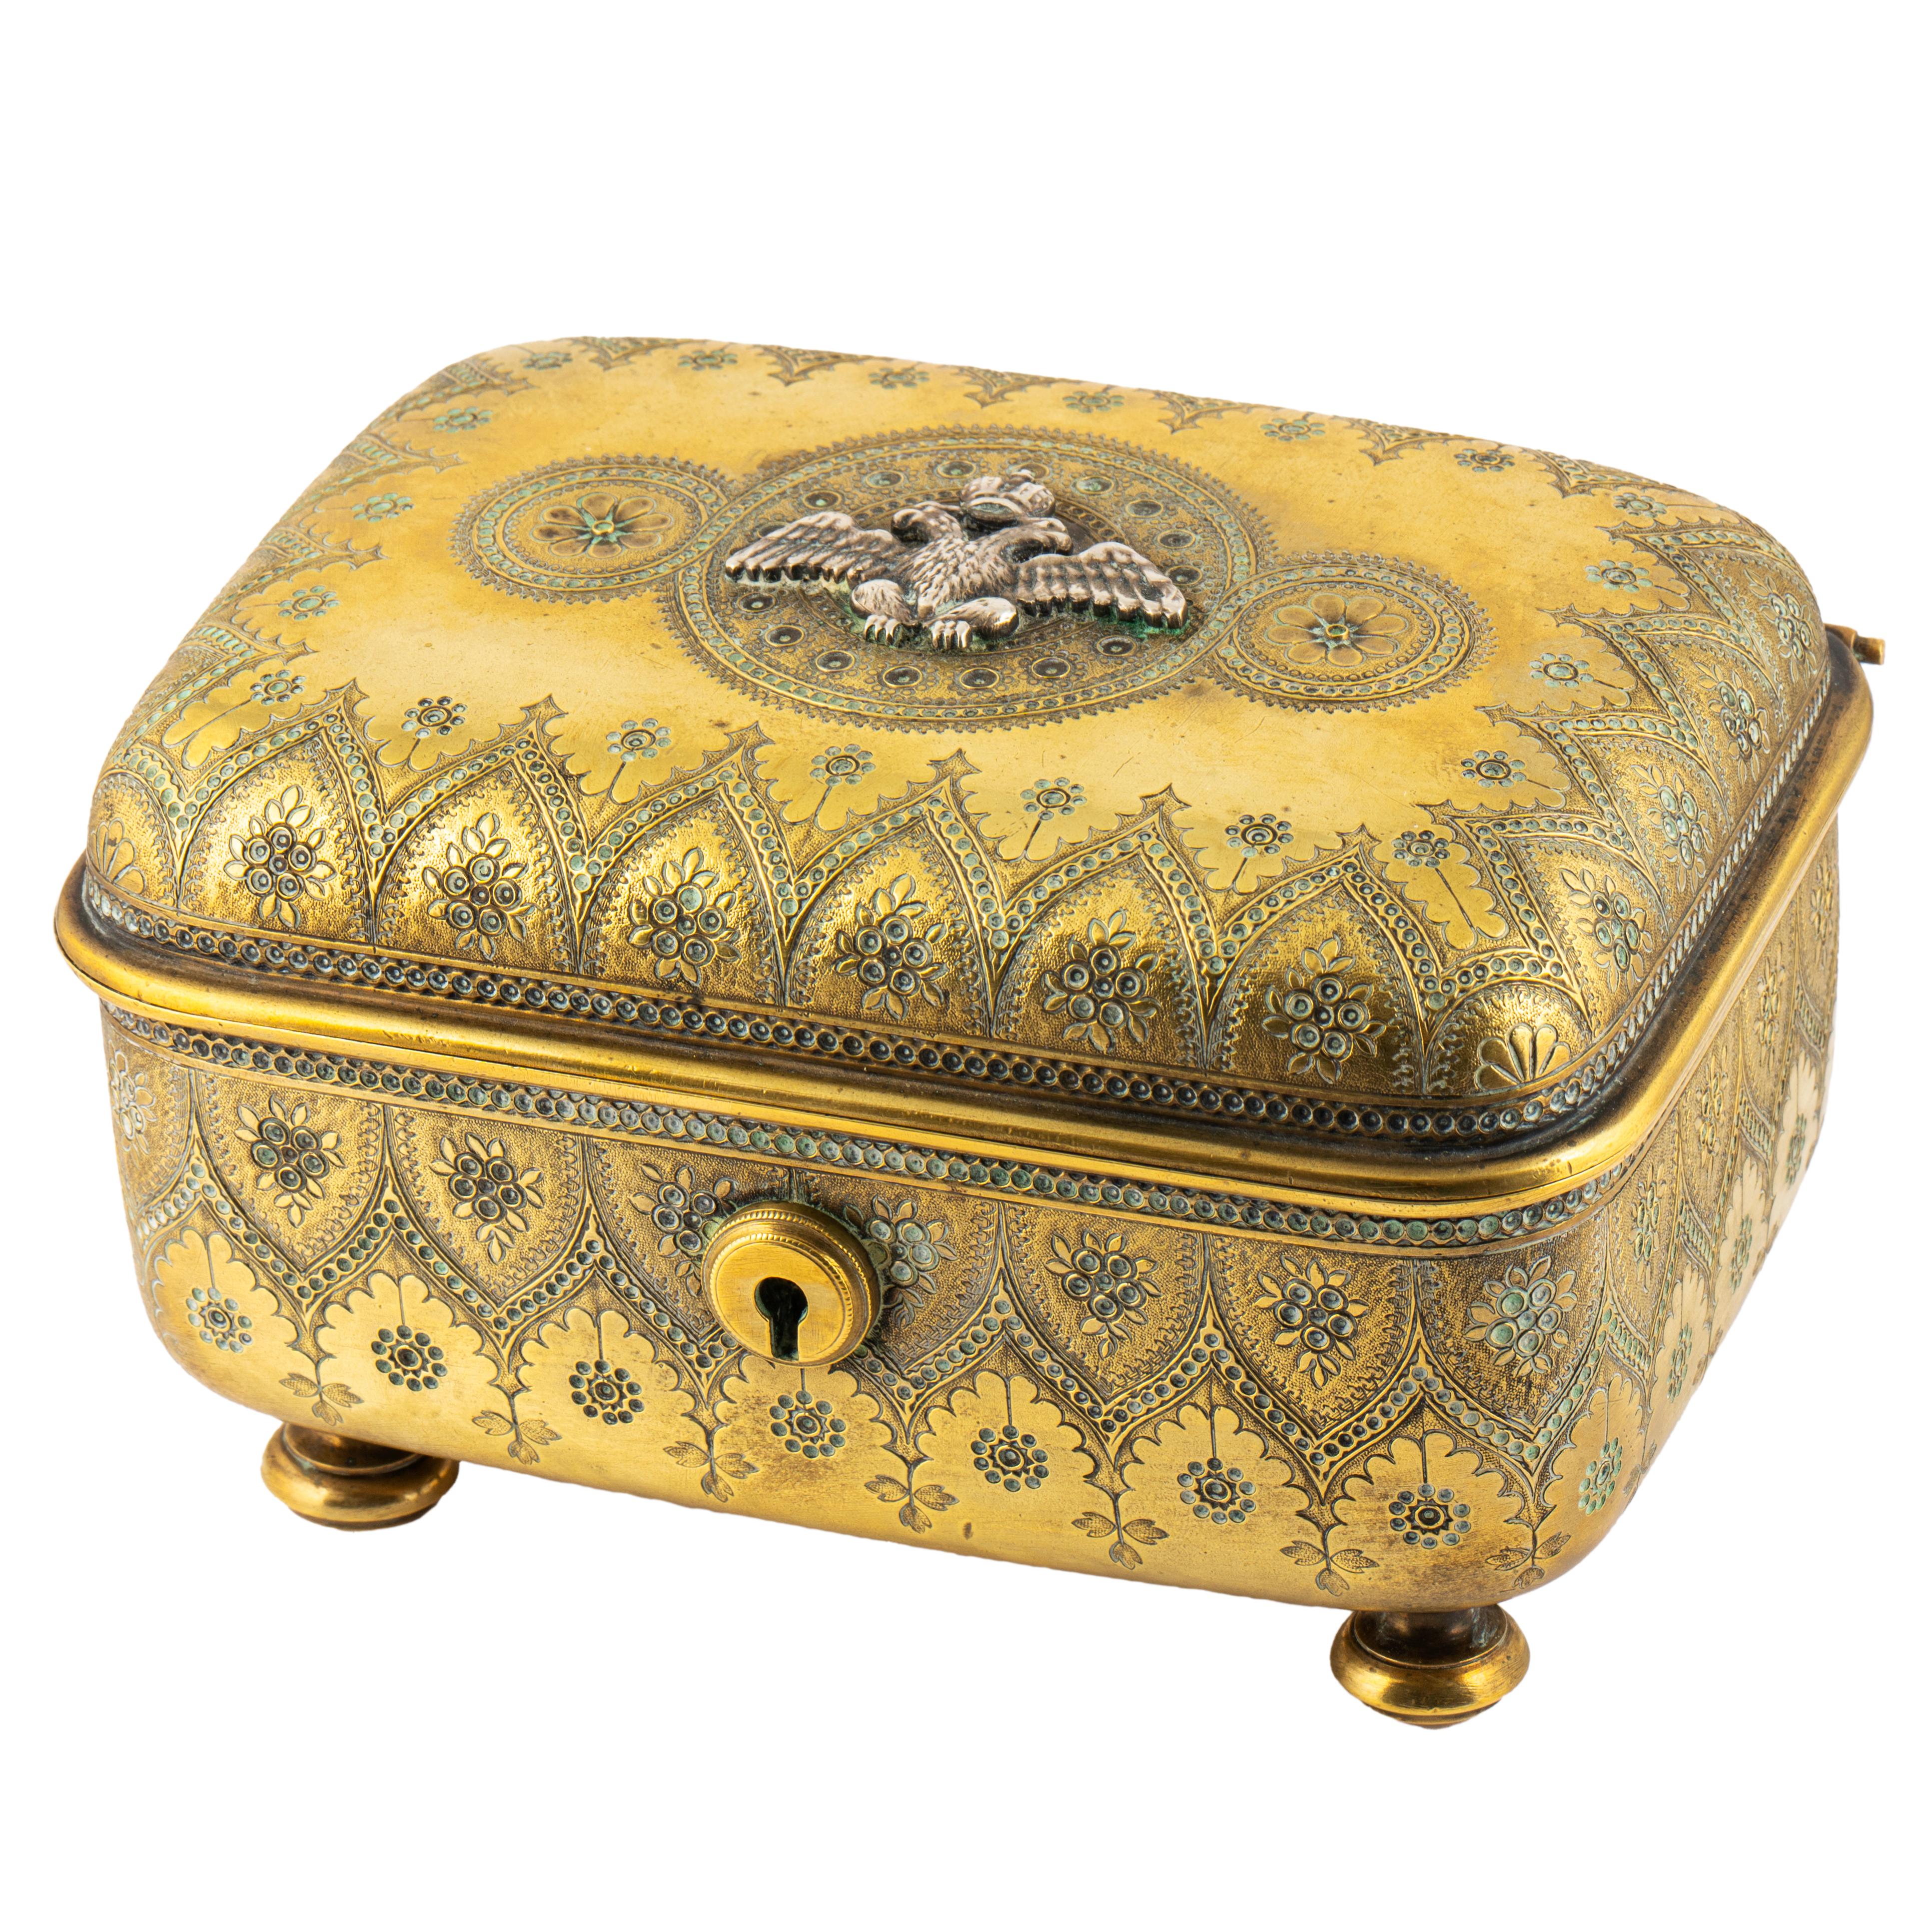 Beautiful Russian brass and silver imperial trinket box from the Romanov era, period of Tsar
Nicholas II, rectangular with rounded corners, the borders and sides decorated with intricate 
floral and peaked arch motifs, the cover applied with a